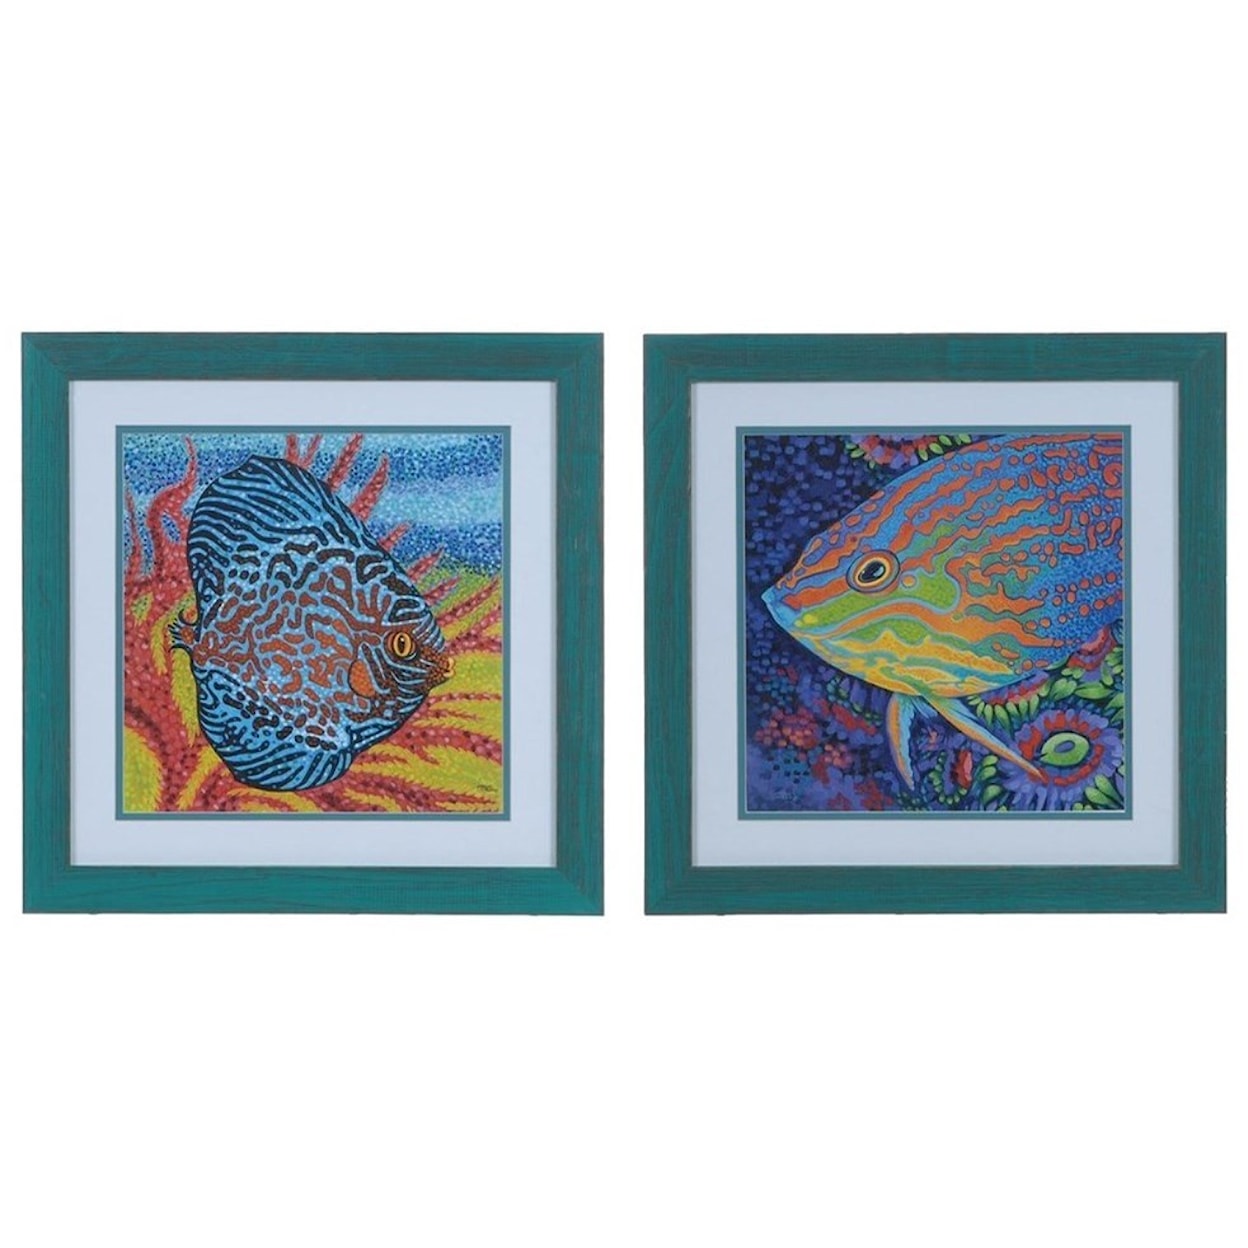 Crestview Collection Prints and Paintings Brilliant Tropical Fish 1 & 2 (Set)